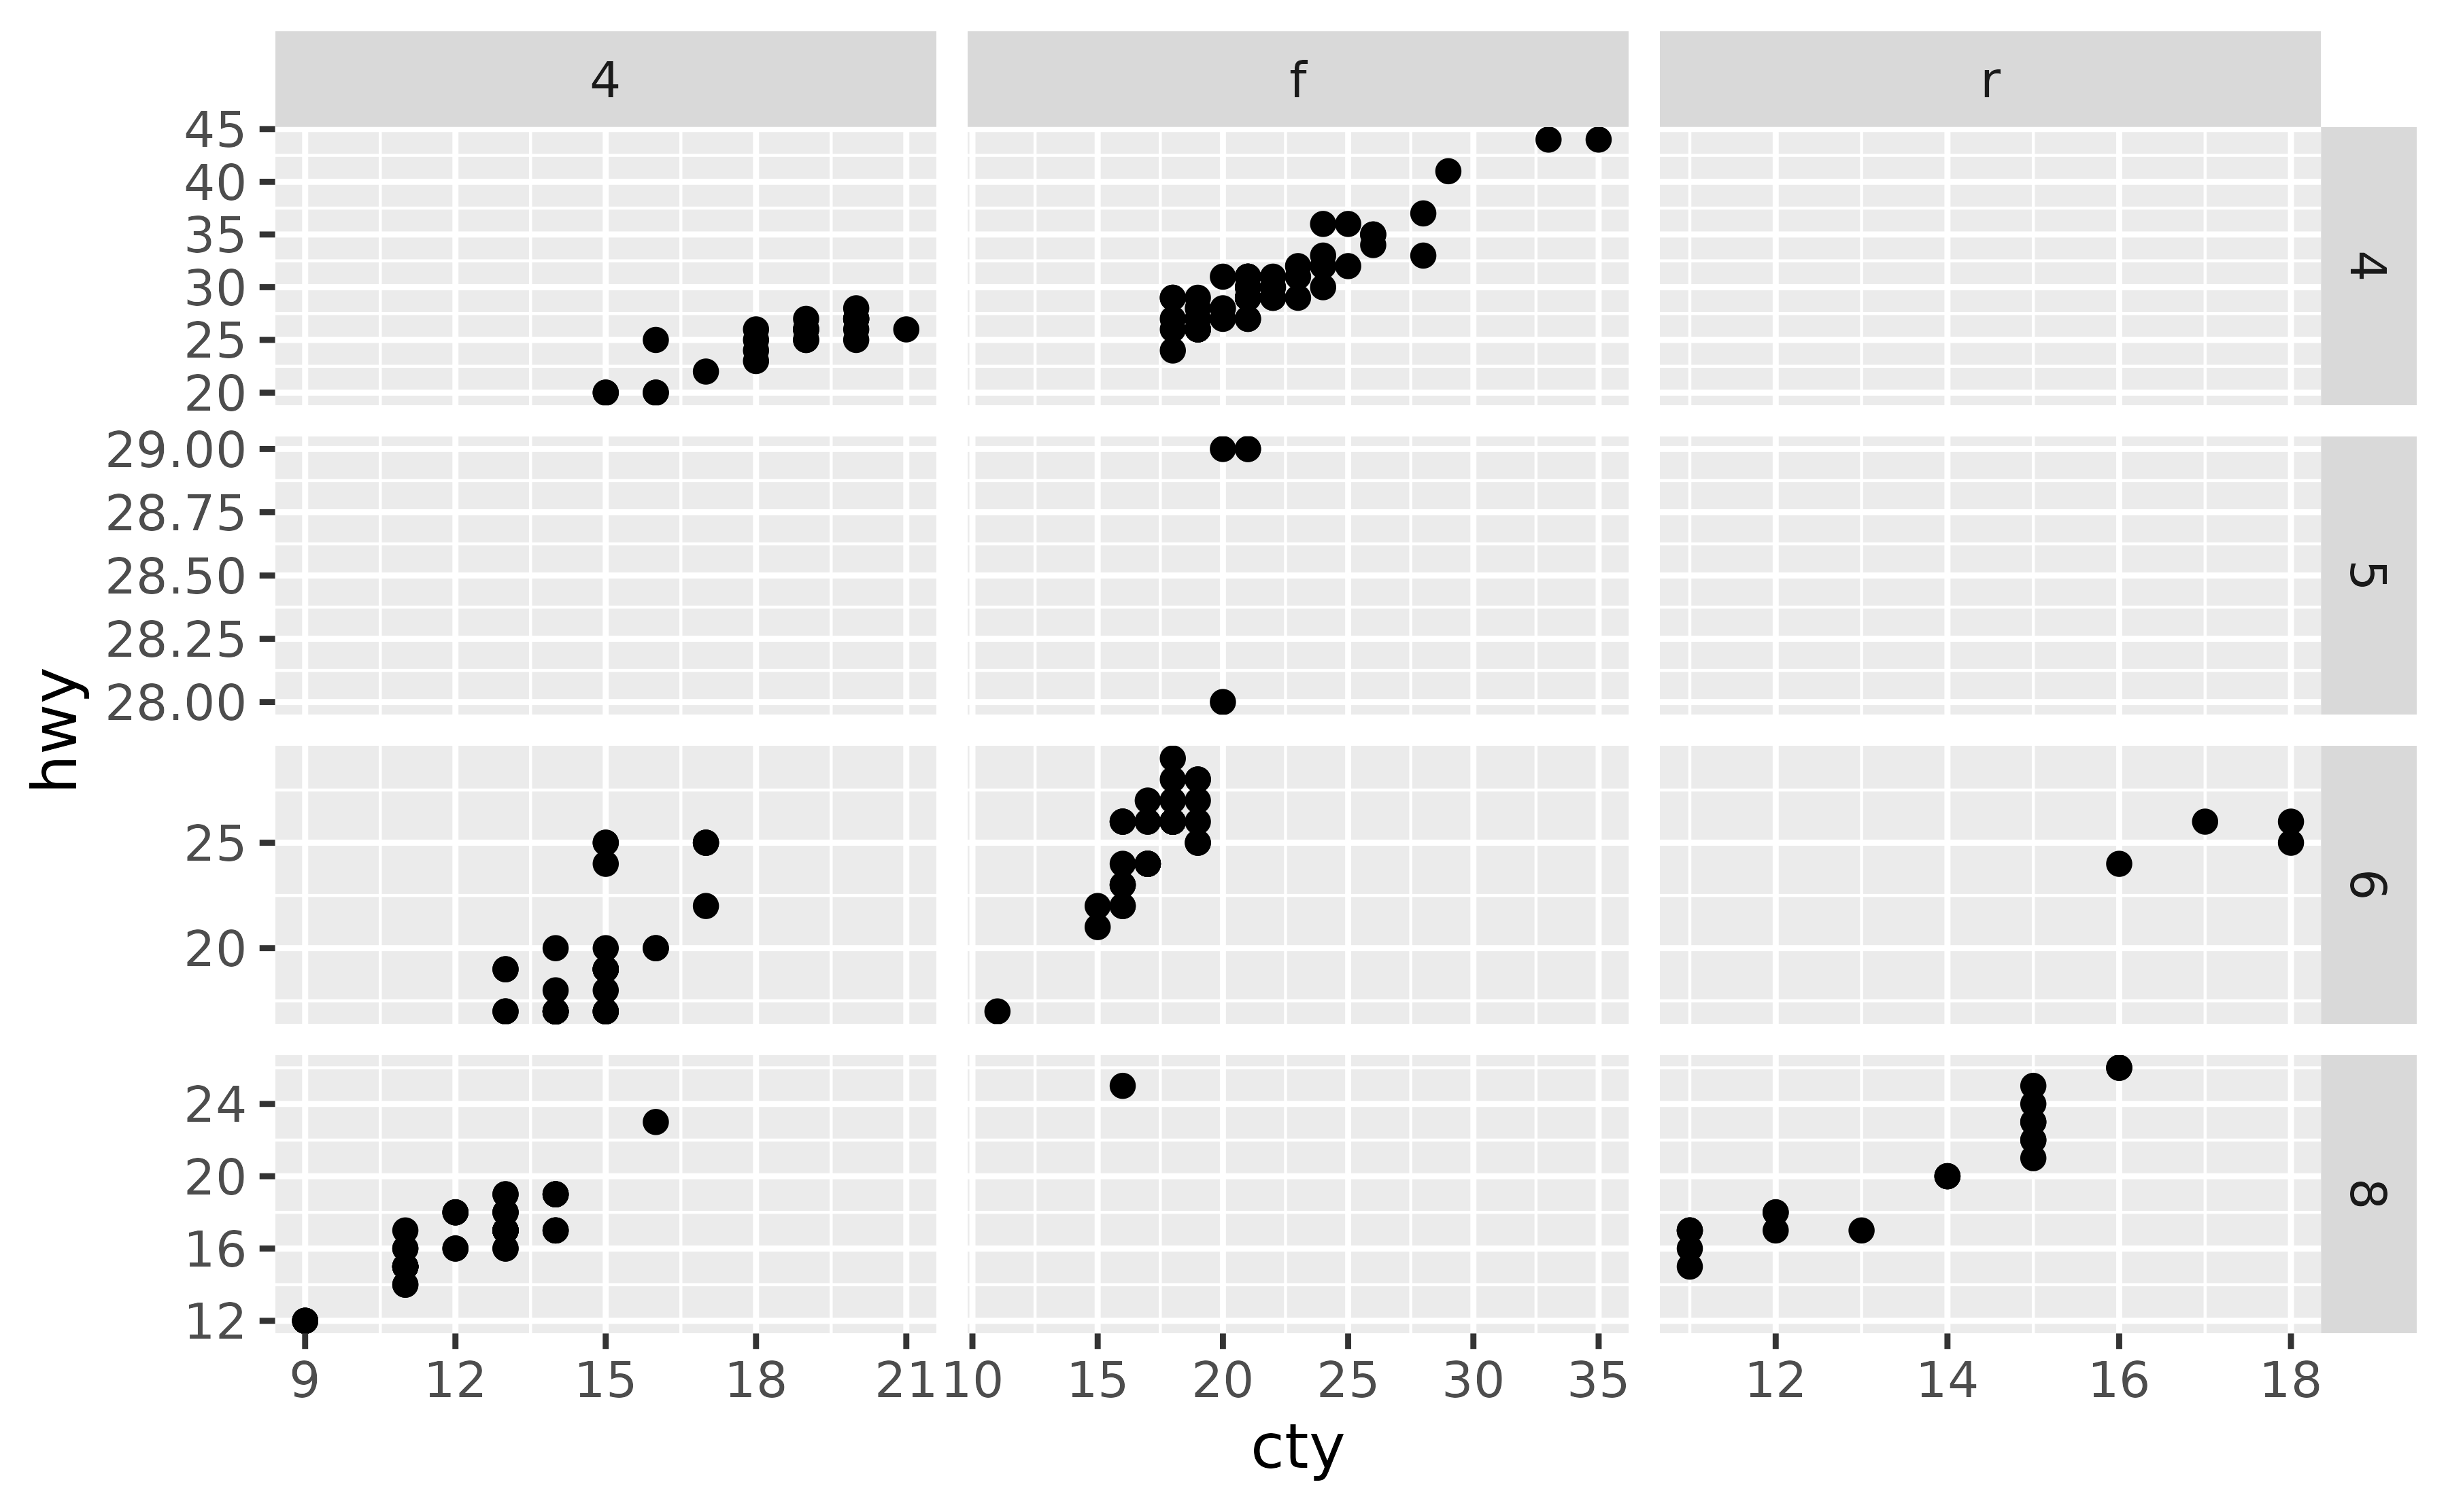 A scatter plot showing city miles per gallon on the x-axis and
 highway miles per gallon on the y-axis. The plot has twelve panels in a
 4-row, 3-column layout, showing three types of drive train in the
 horizontal direction and four numbers of cylinders in the vertical
 direction. Several panels are empty. Every row in the layout has an
 independent y-axis range. Every column in the layout has an independent
 x-axis range.